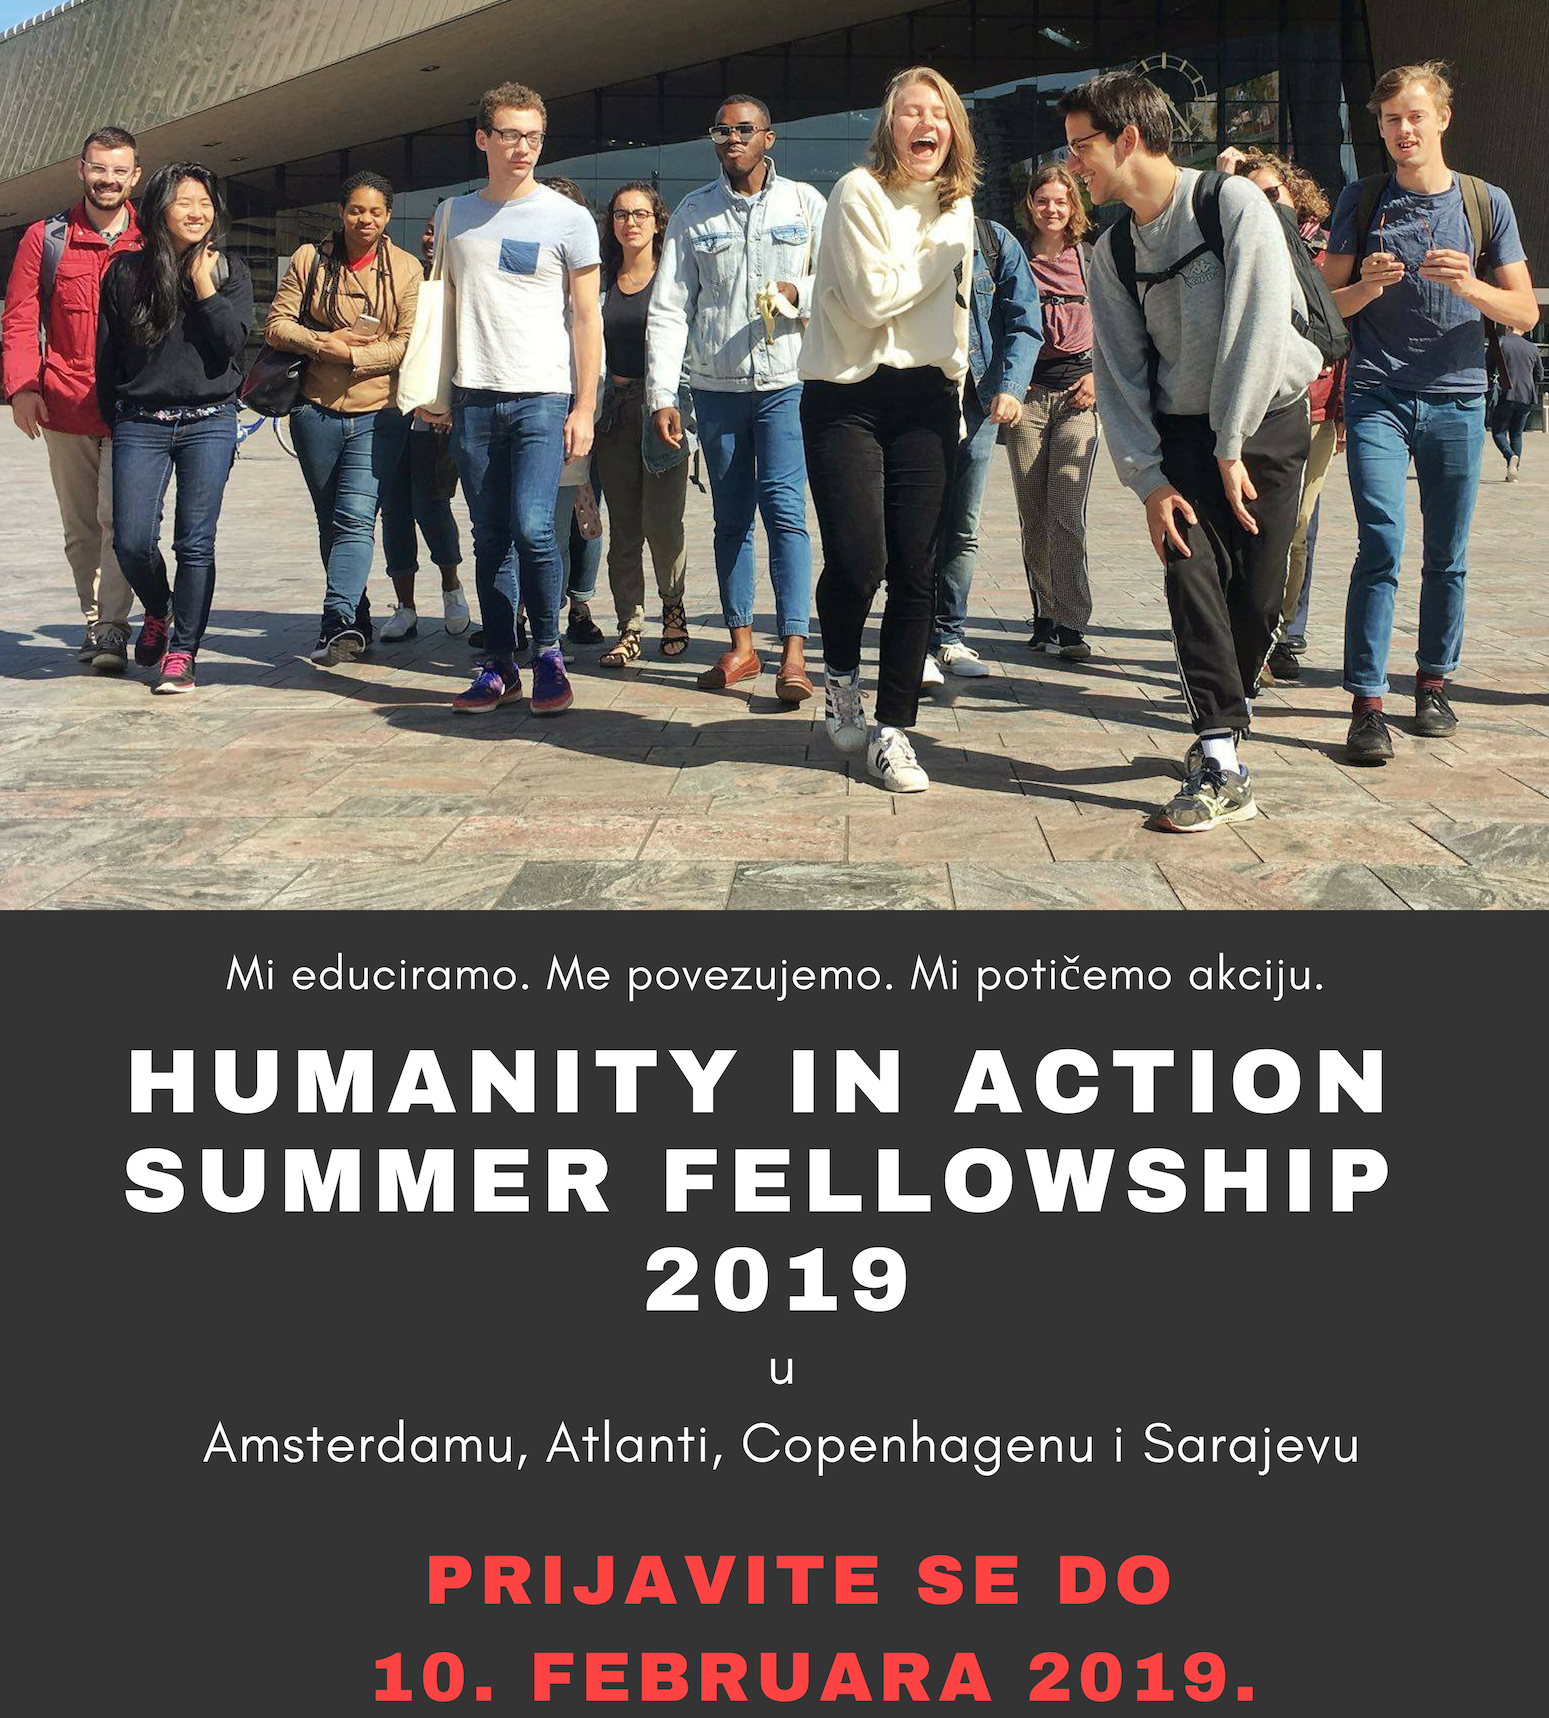 INVITATION FOR SUBMITTING APPLICATIONS FOR PARTICIPATION ON HUMANITY AND ACTION SUMMER PROGRAMS 2019